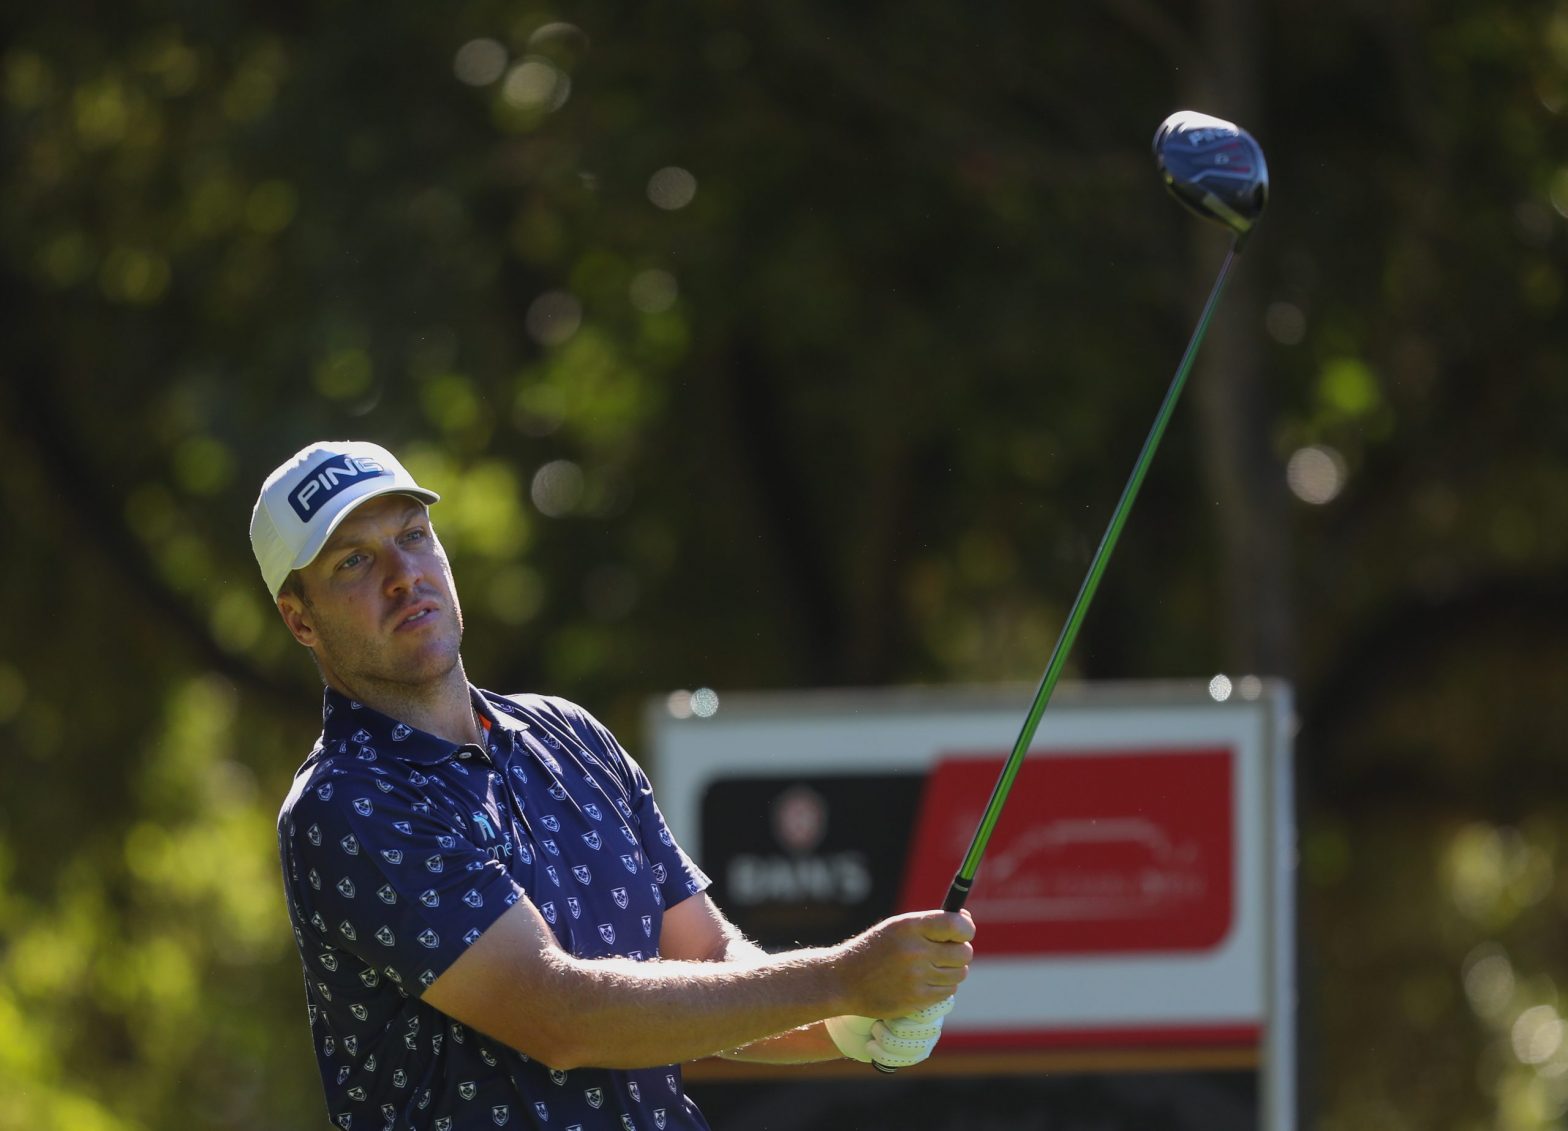 Three-way tie for title chase in Cape Town